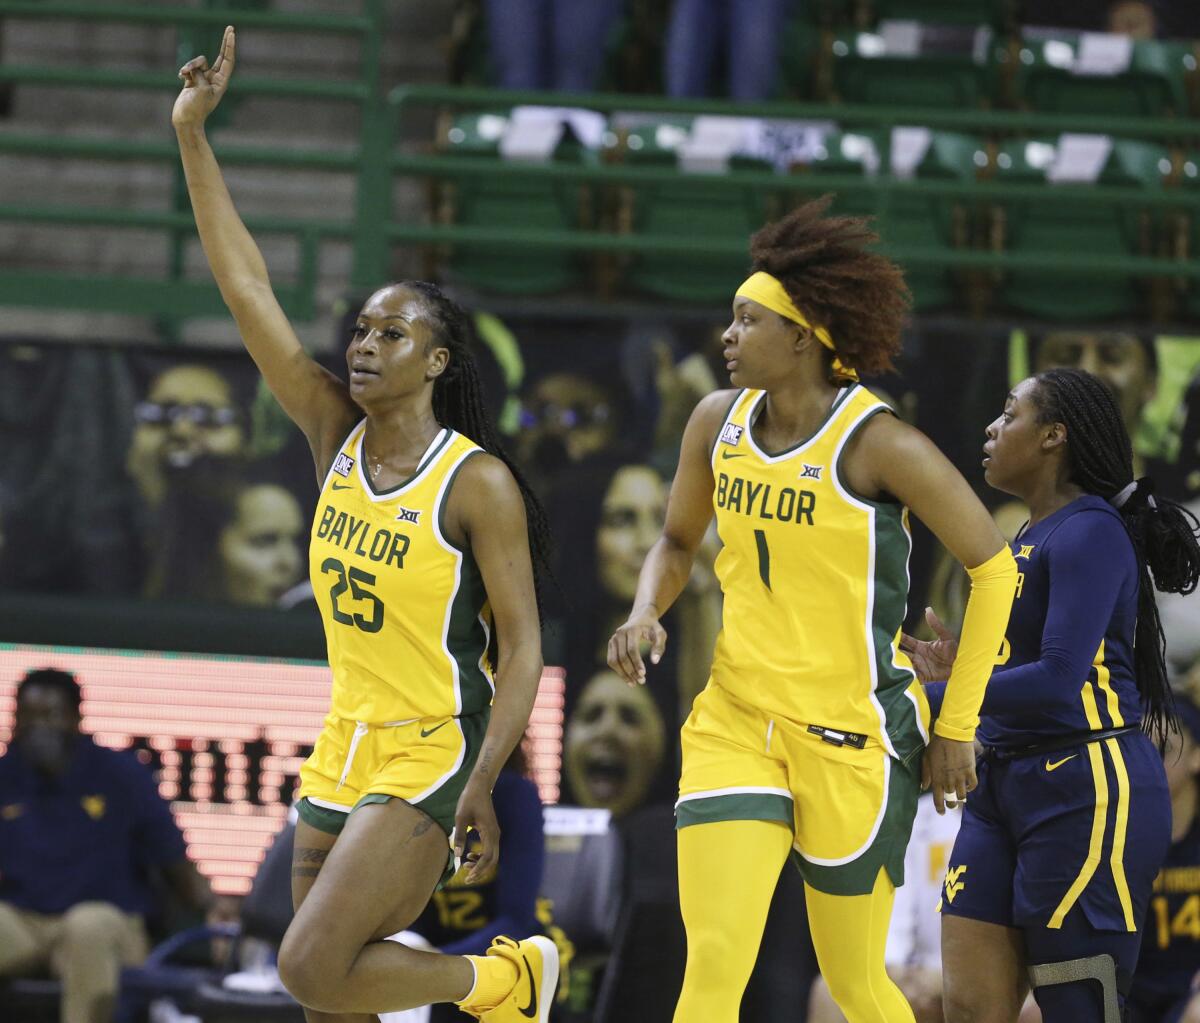 Baylor center Queen Egbo, left, celebrates her score over West Virginia with teammate NaLyssa Smith in the first half of an NCAA college basketball game, Monday, March 8, 2021, in Waco, Texas. (Rod Aydelotte/Waco Tribune Herald, via AP)